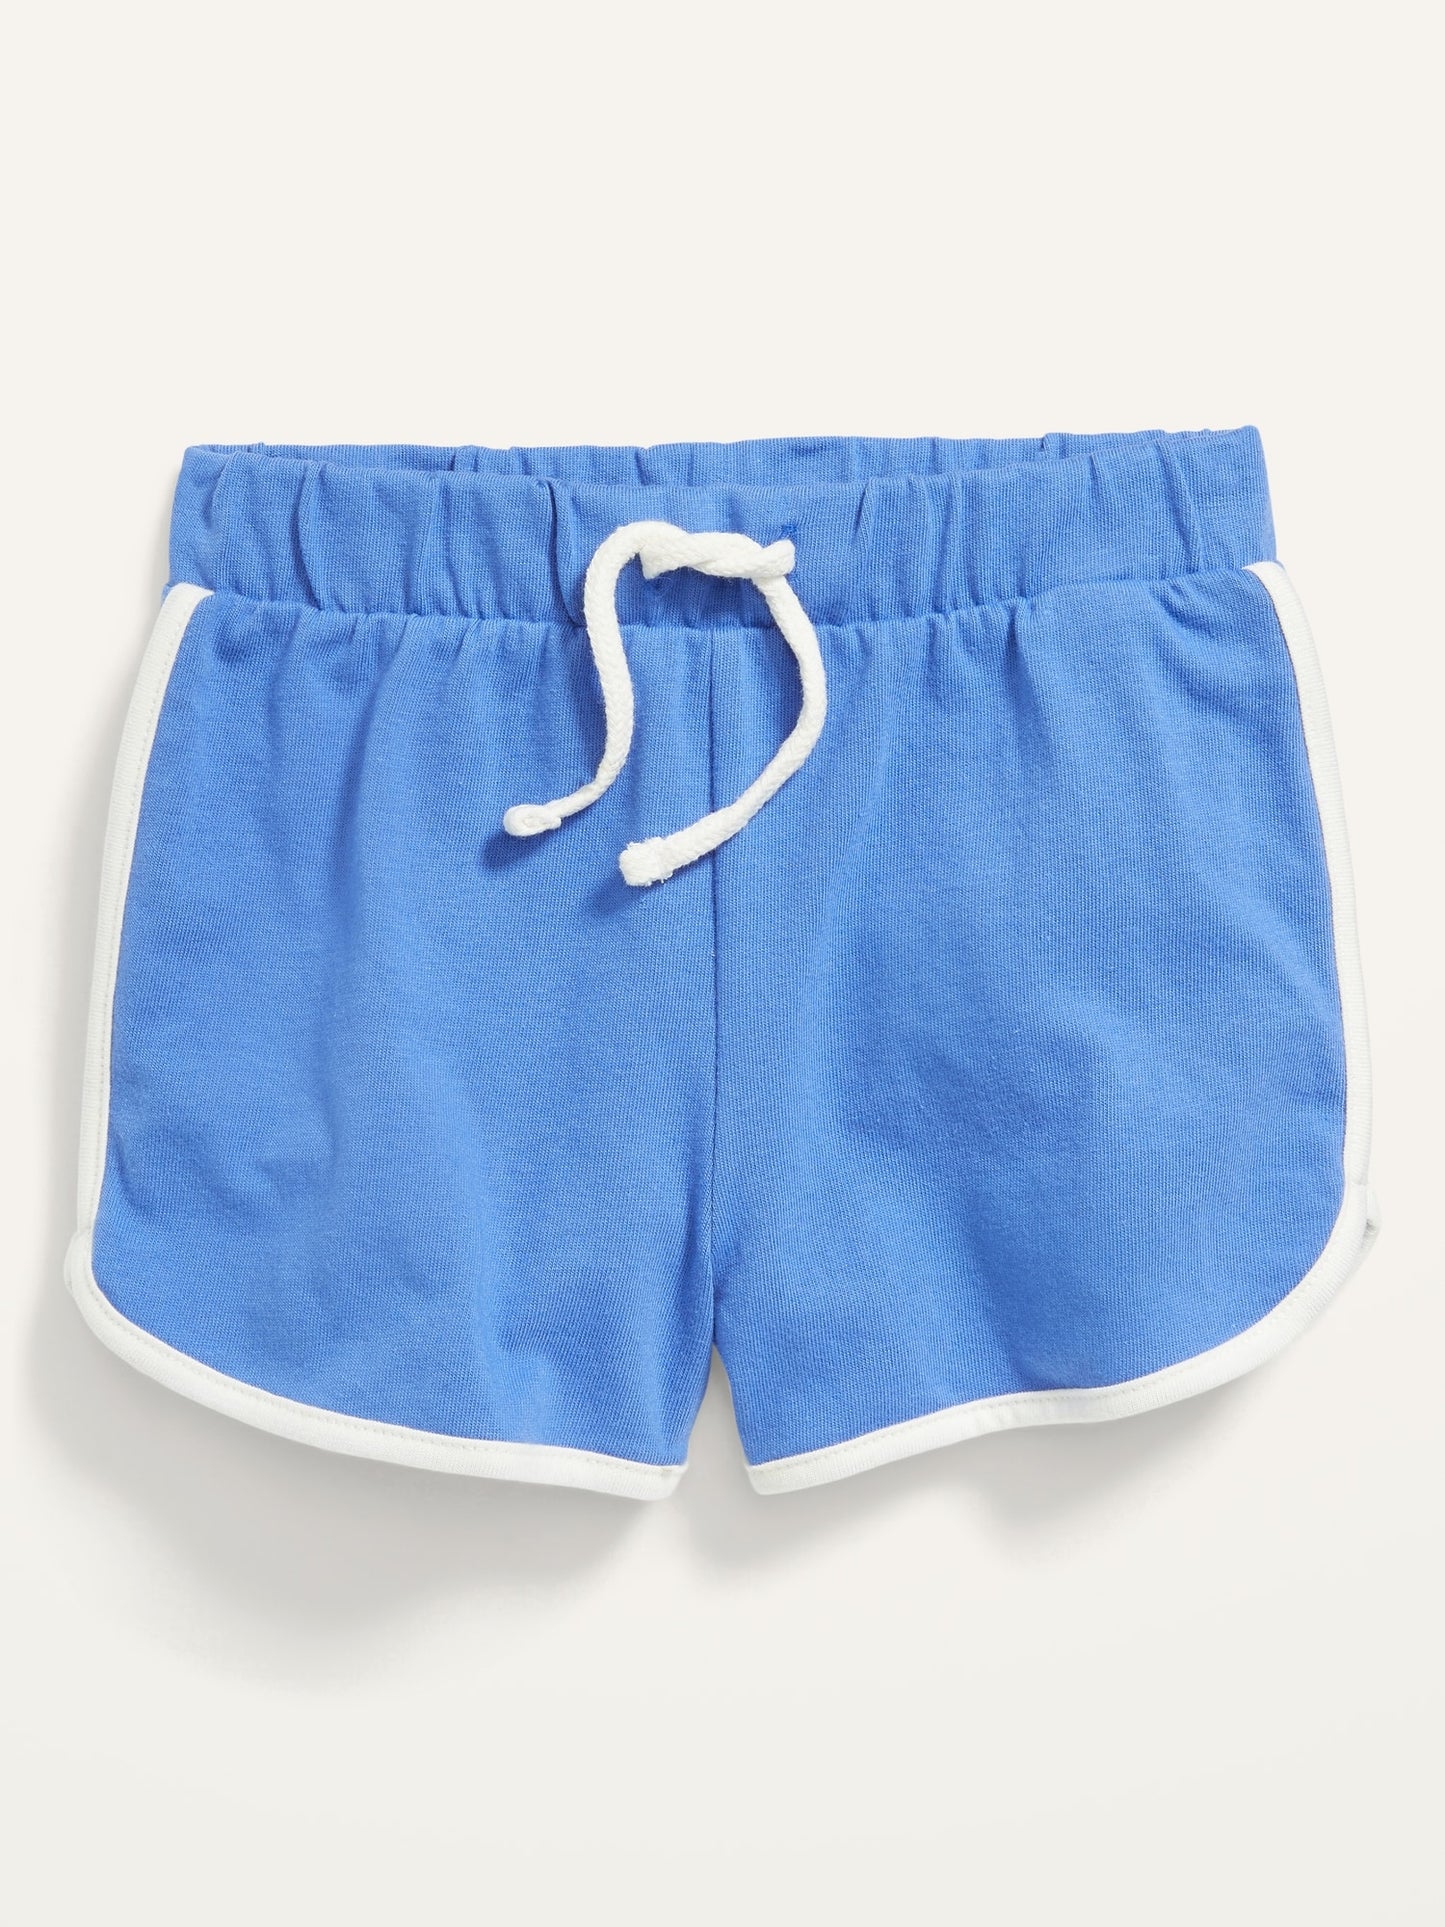 ON Piped-Trim Jersey Cheer Shorts For Toddler Girls - Blue Spirit - Everyday Magic